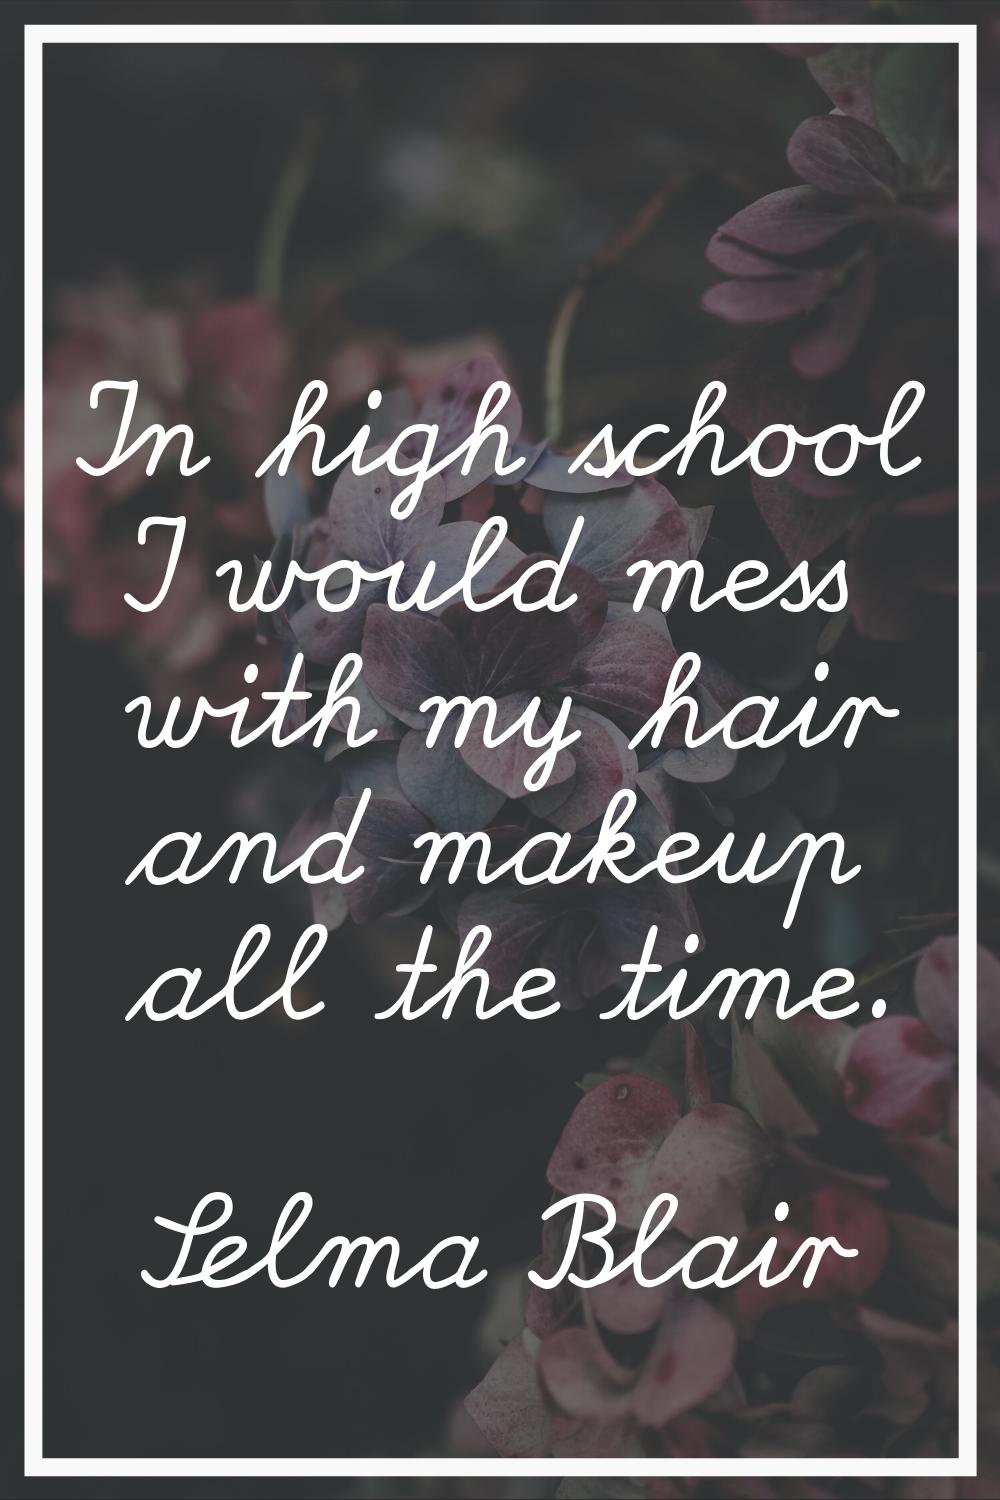 In high school I would mess with my hair and makeup all the time.